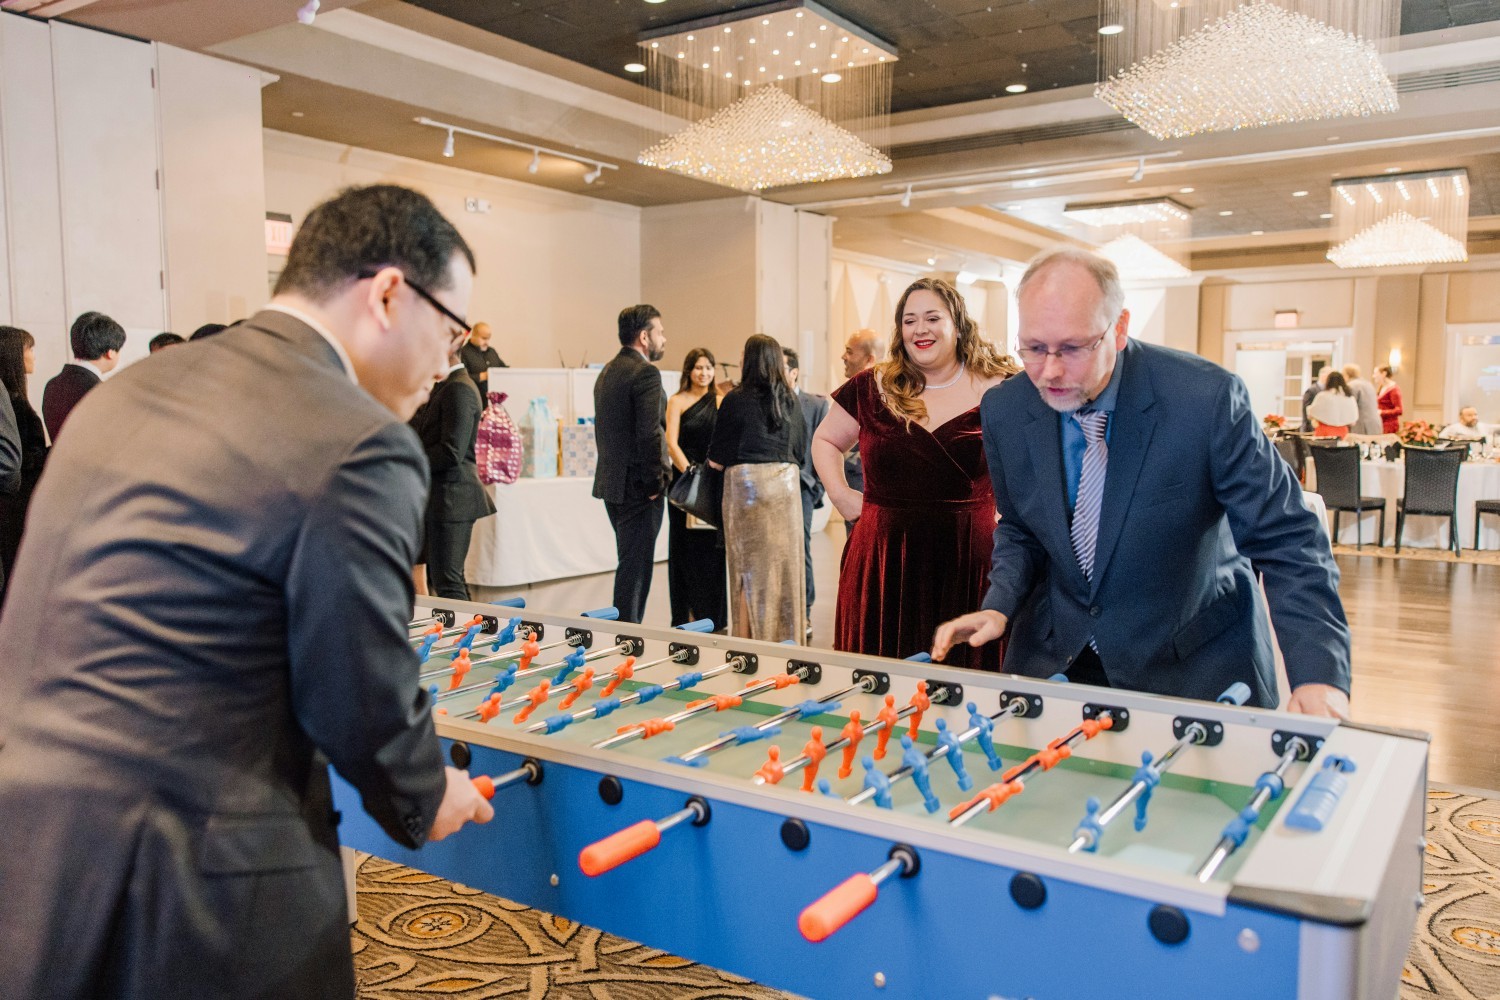 Each year, Precise employees will gather at our annual Holiday Party and there are always fun activities available.